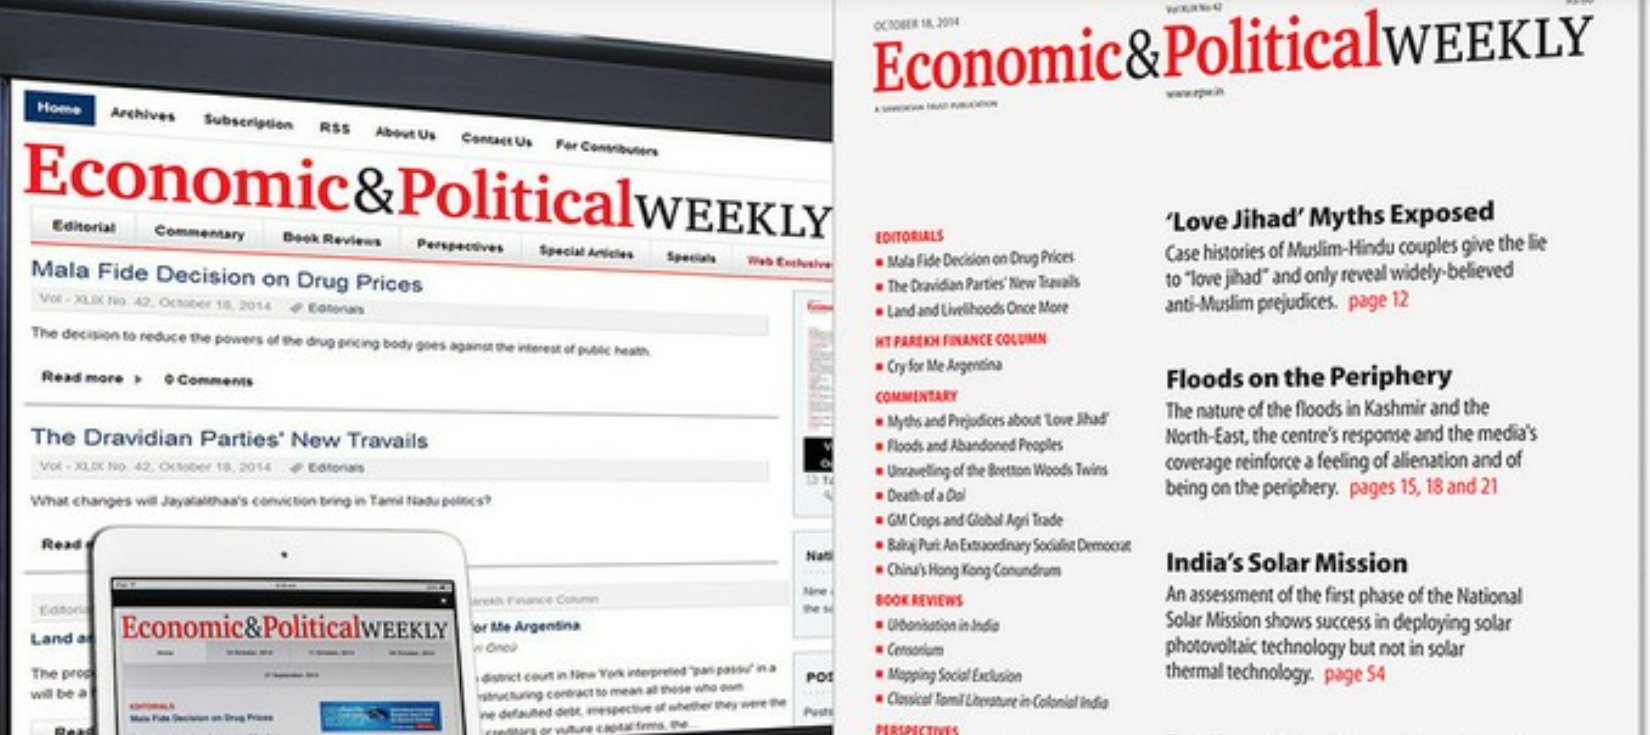 Report Of The Economic And Political Weekly By The Sameeksha Trust